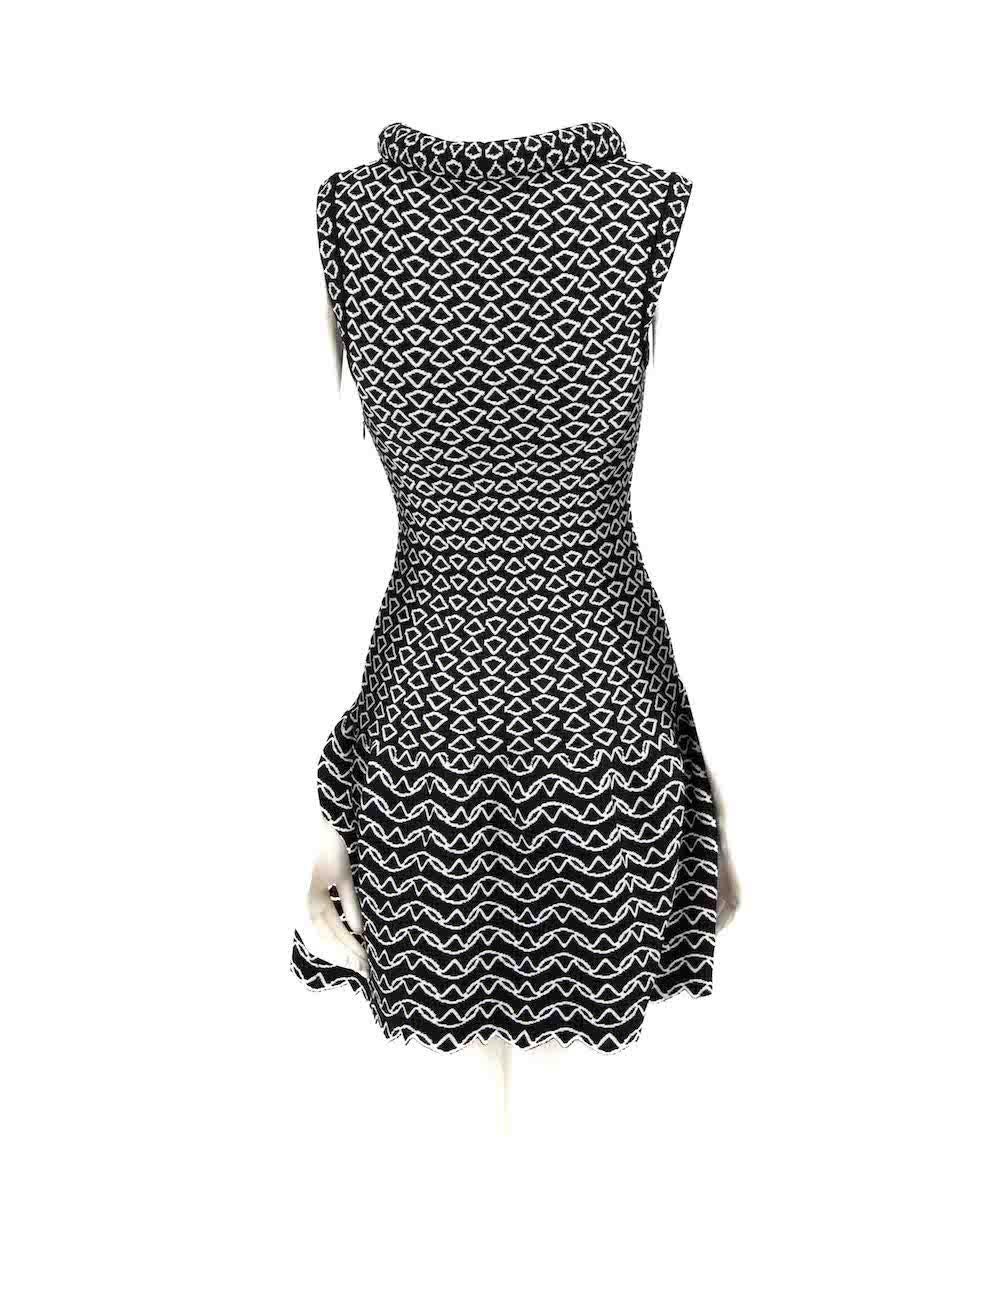 Alaïa Black Padded Neck Sleeveless Abstract Knit Dress Size S In Excellent Condition For Sale In London, GB